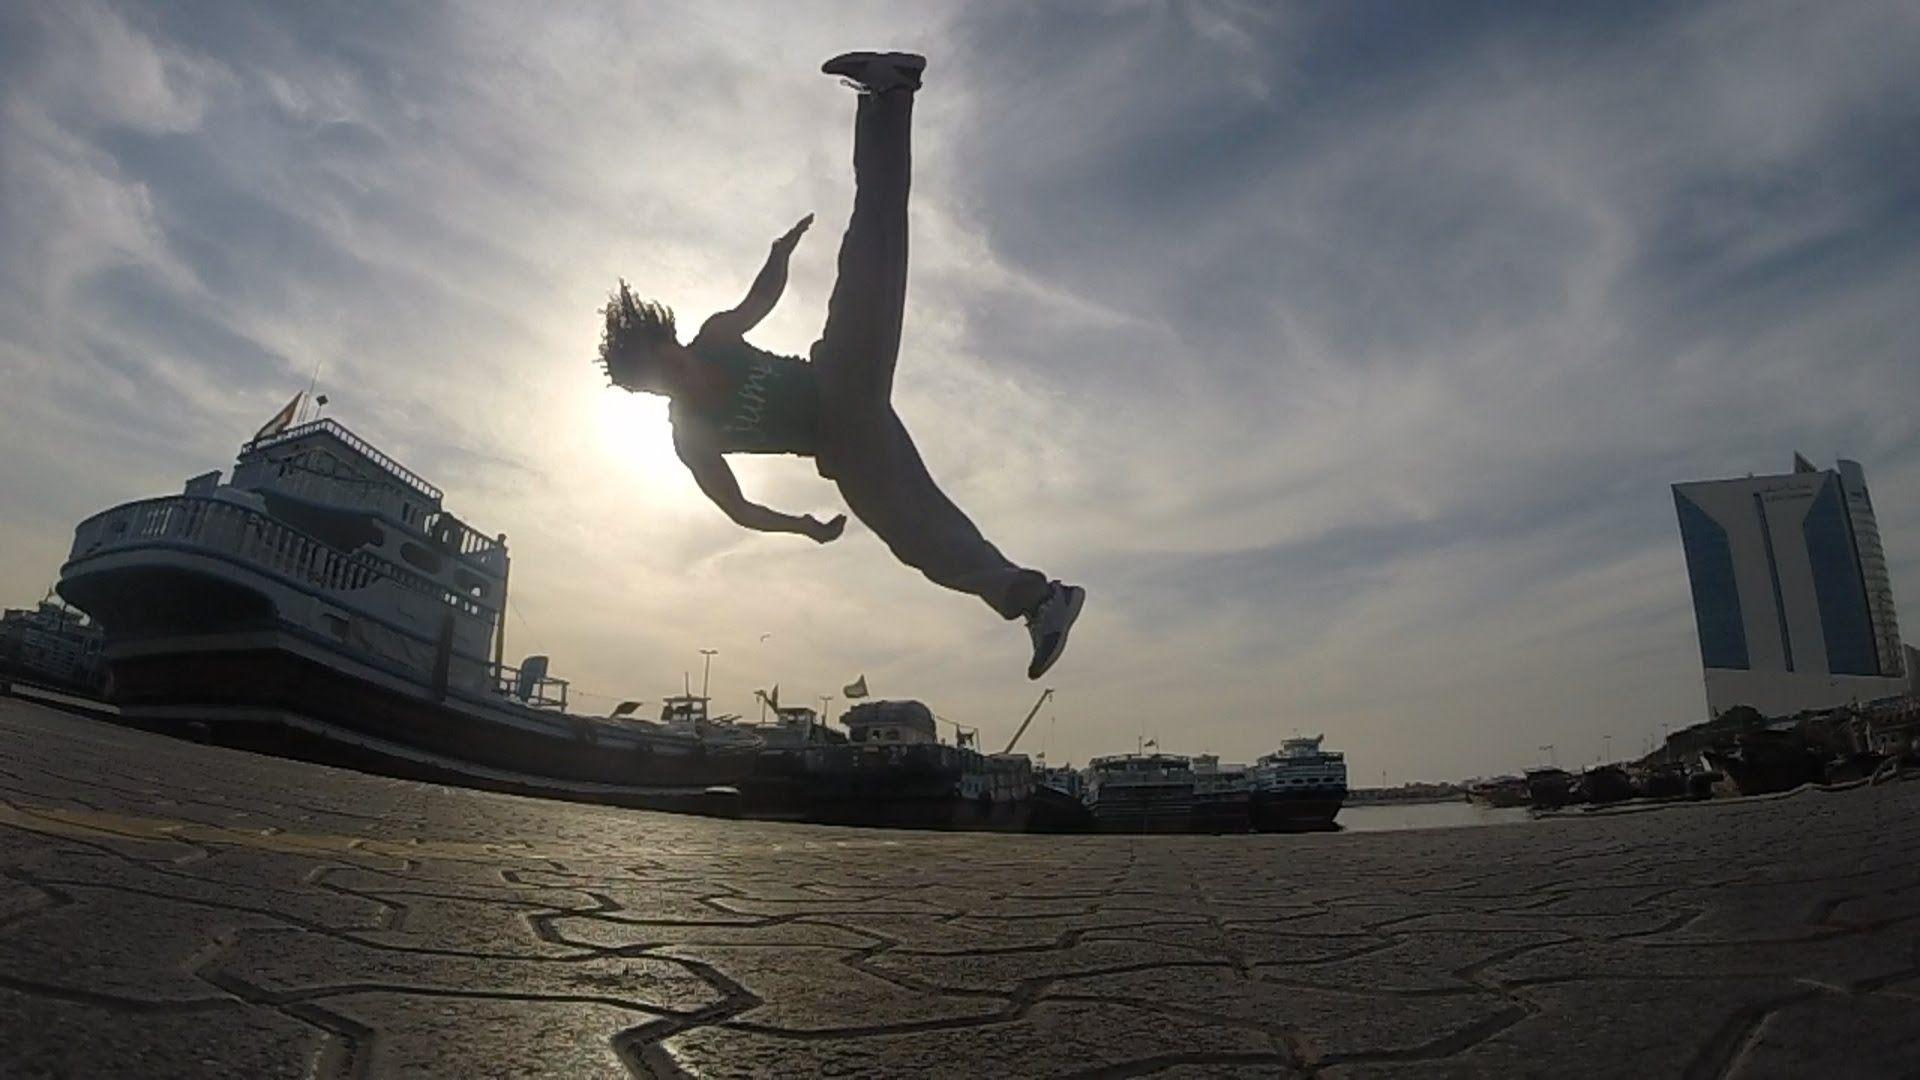 Download Parkour Free Running Wallpaper Gallery